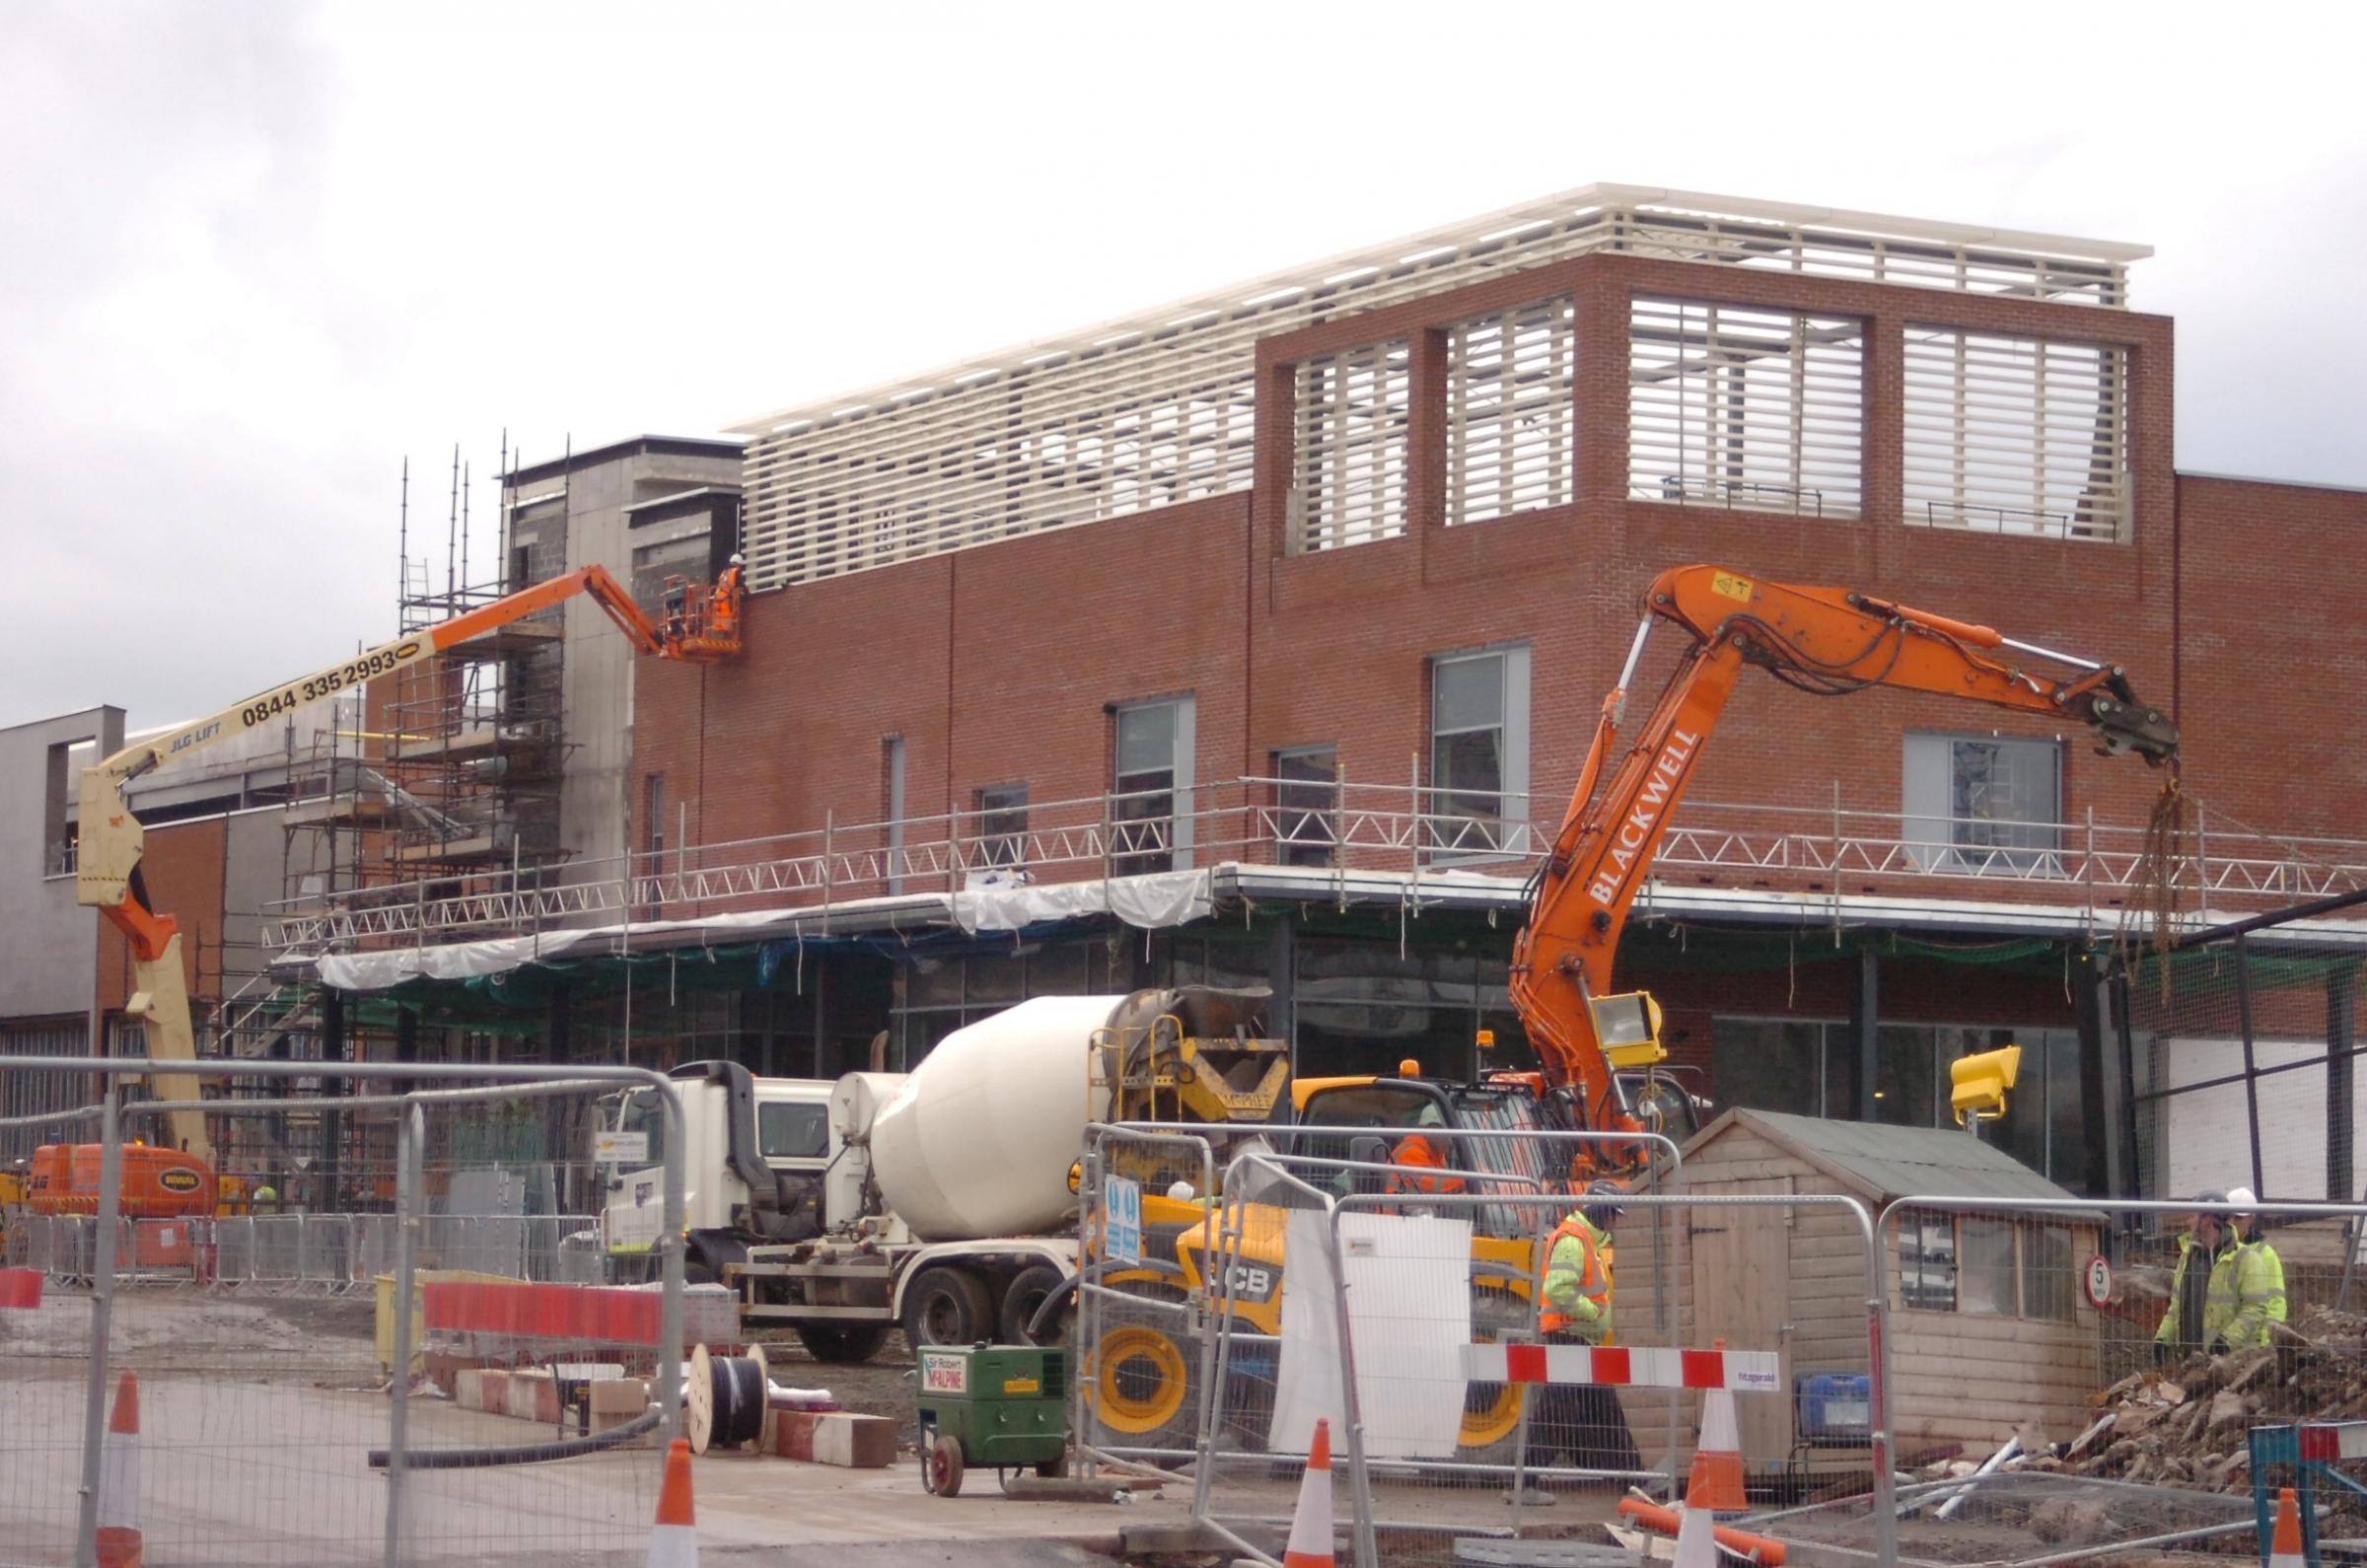 Construction work continuing on the Waitrose building at Herefords Old Market